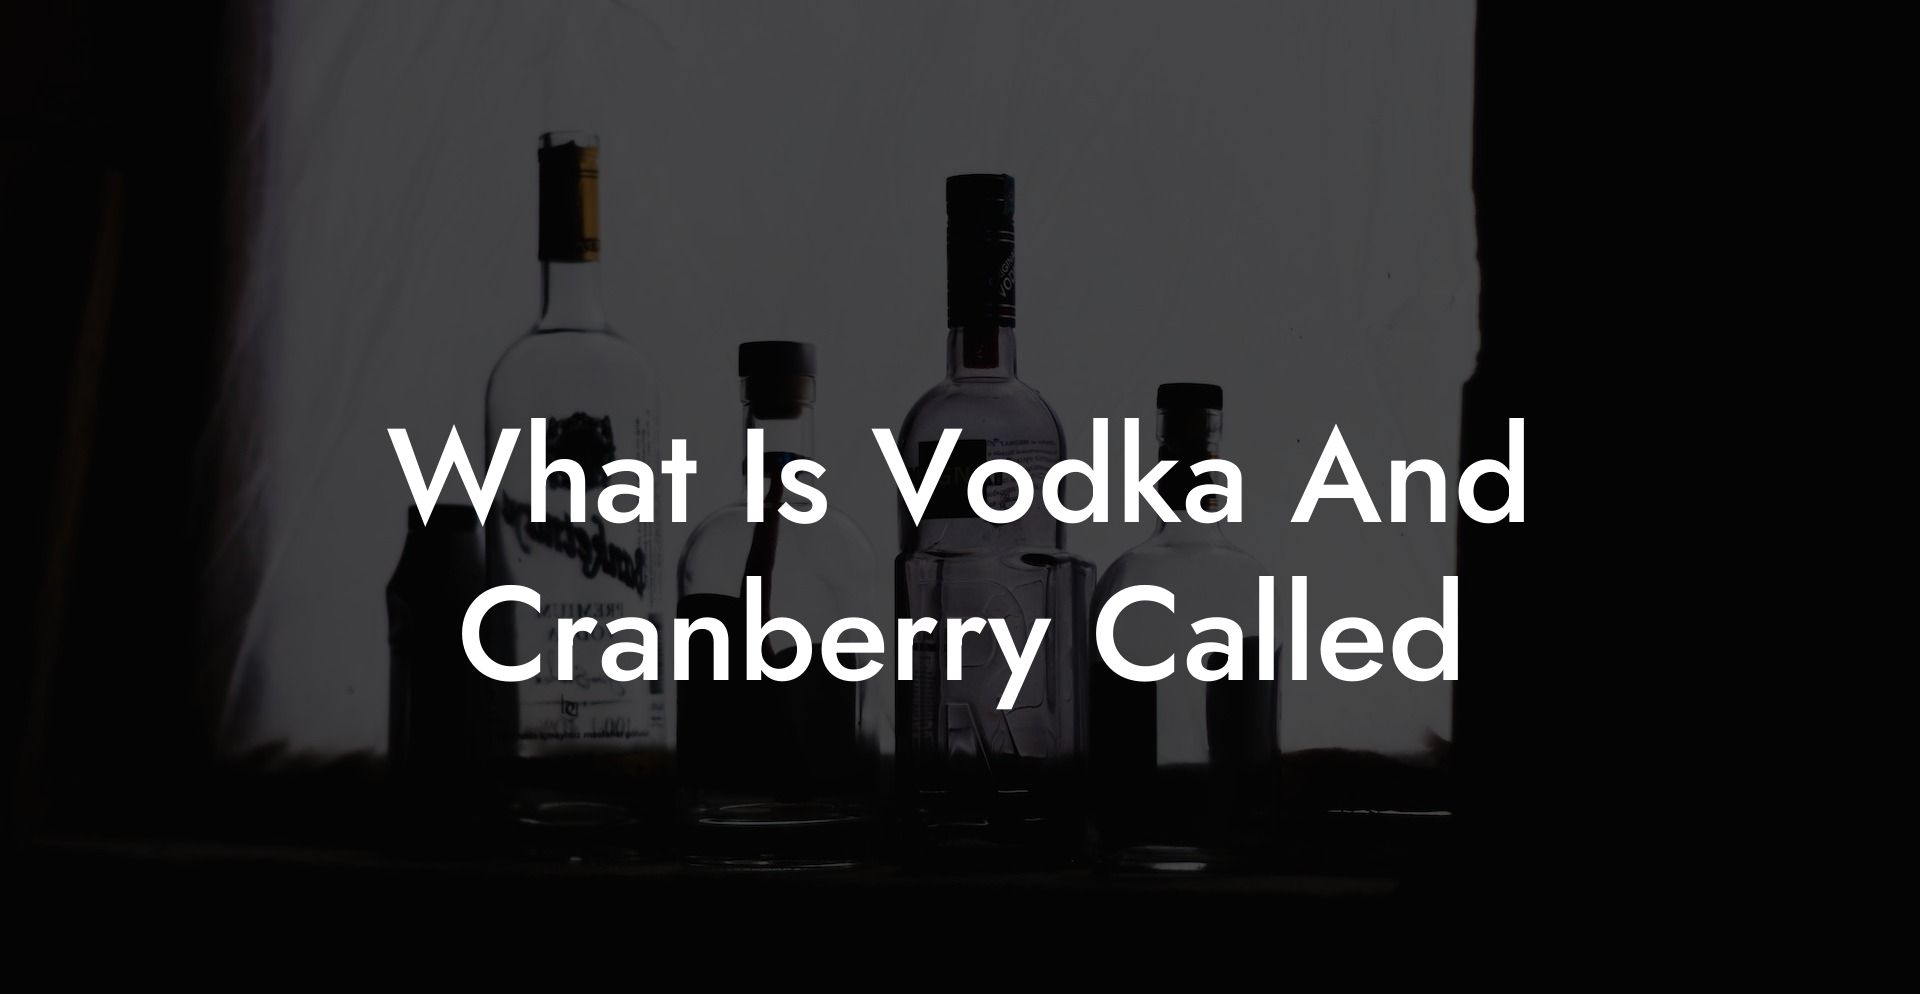 What Is Vodka And Cranberry Called